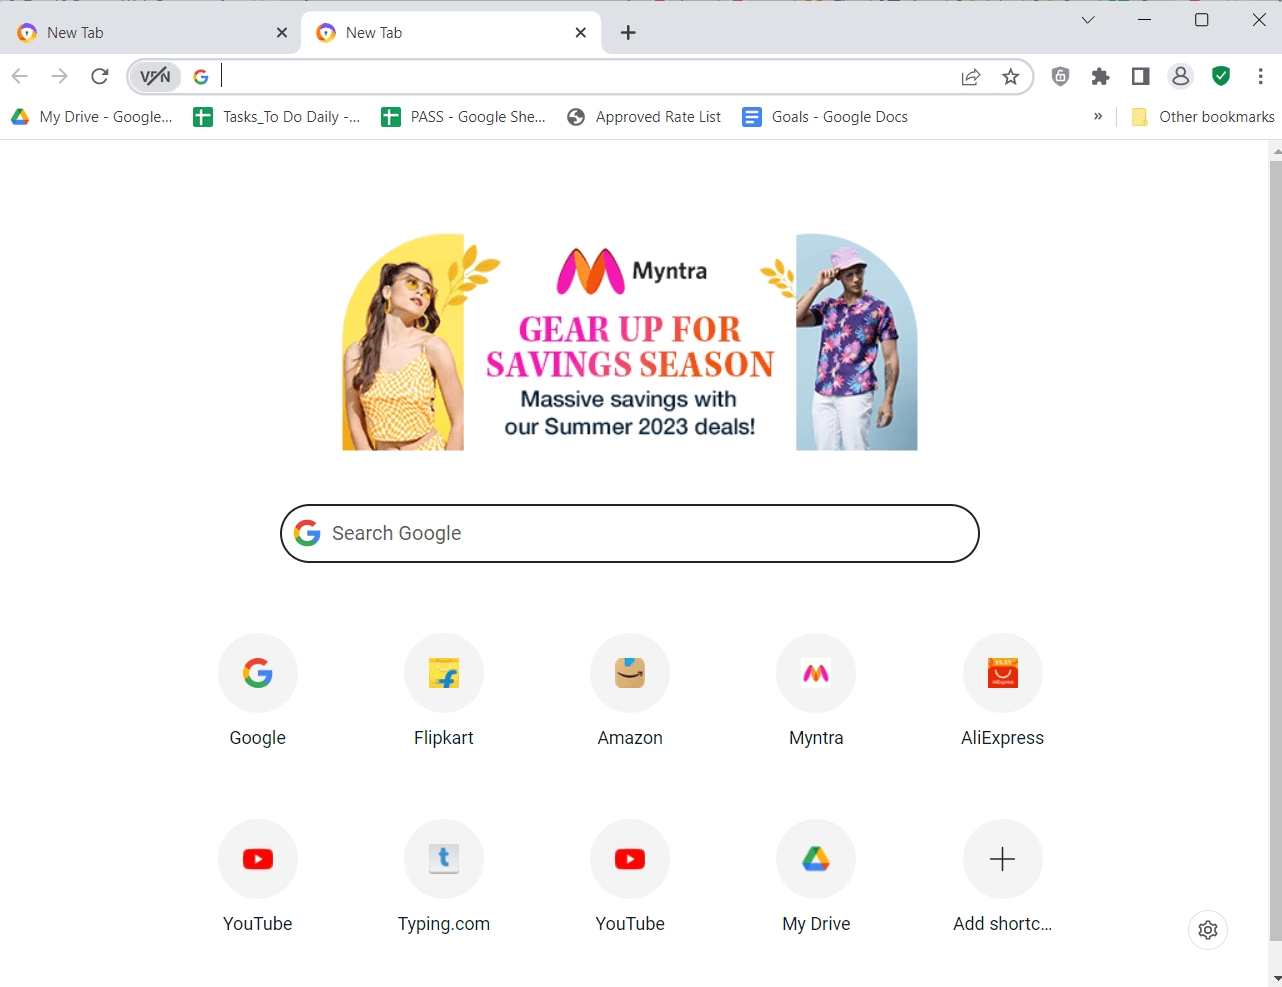 fastest web browser